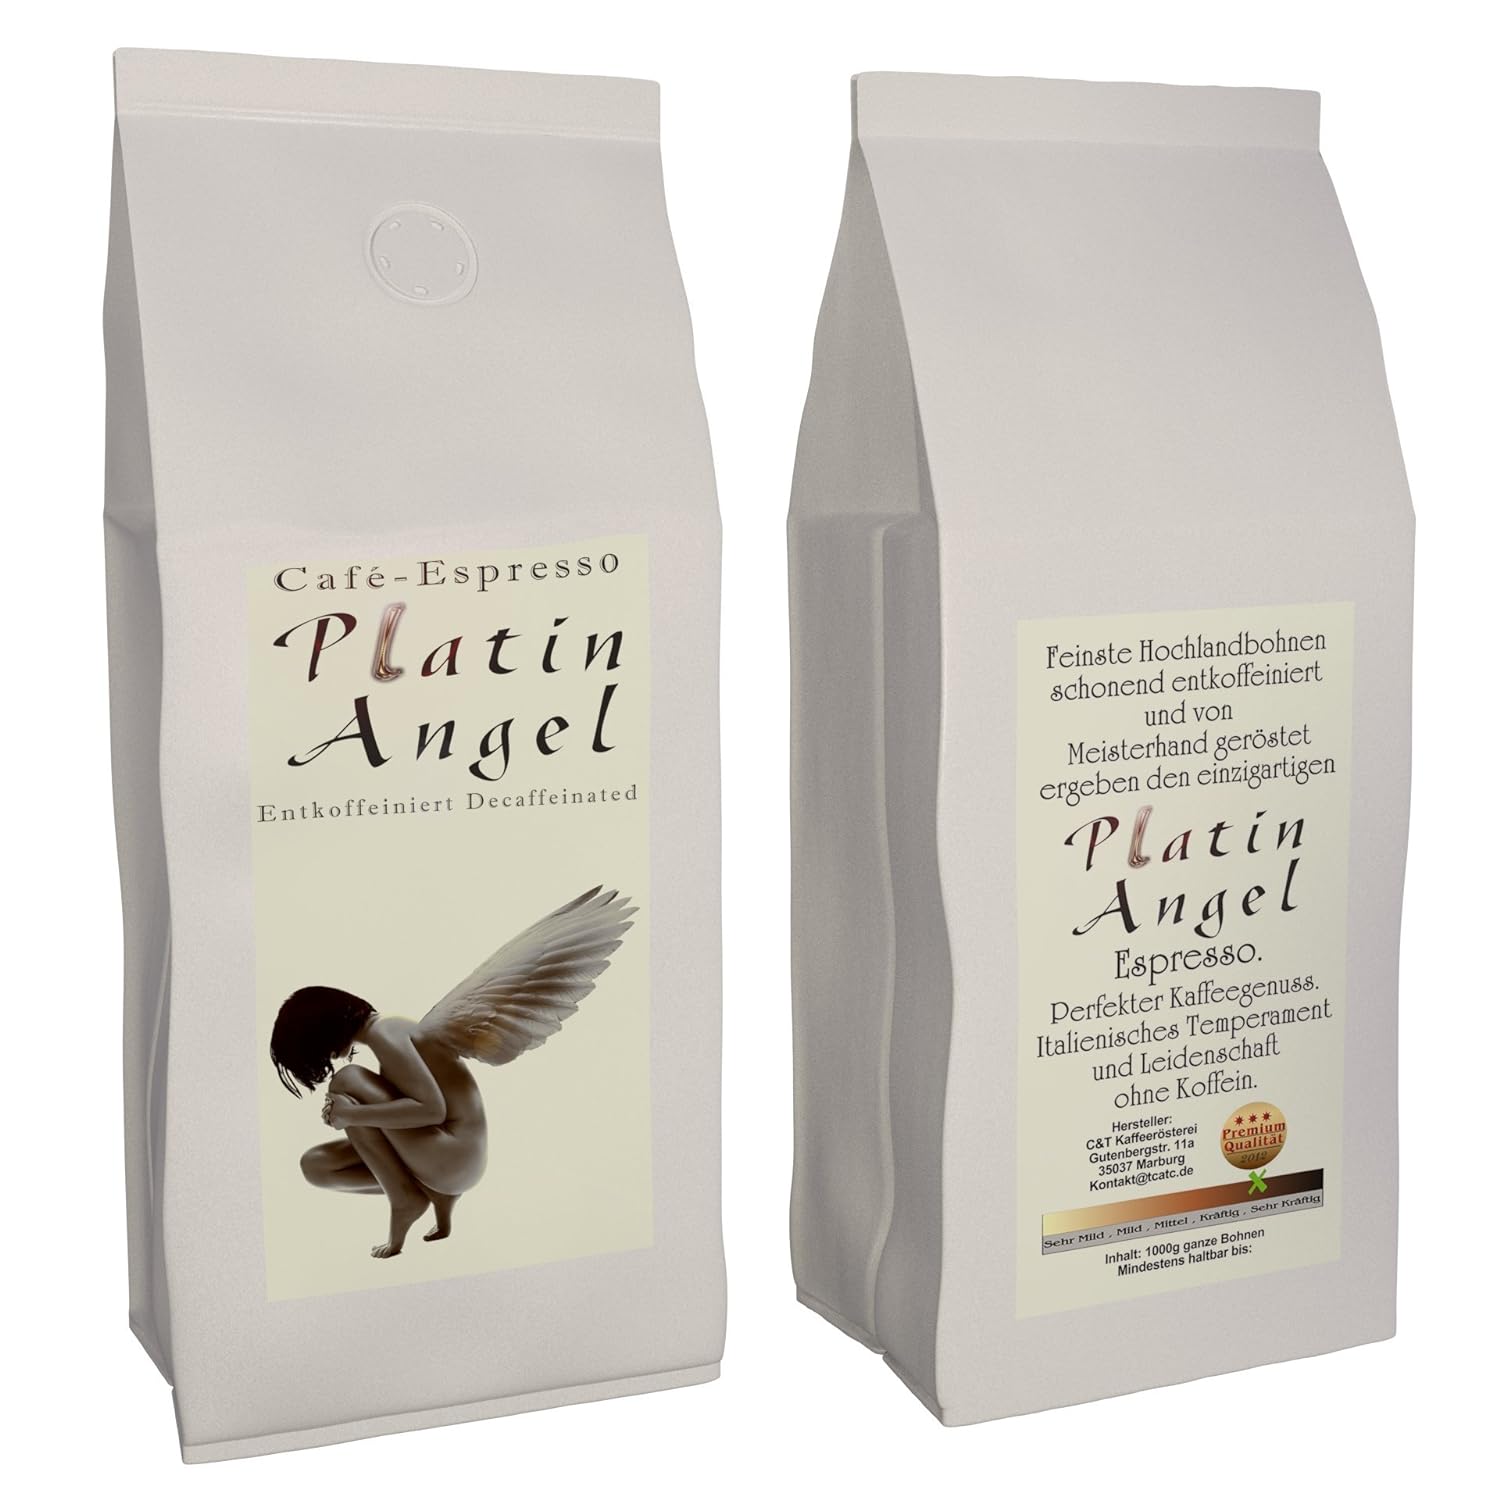 Espresso / Cafe - Coffee Beans Decaffeinated \"Platinum Angel\" (Ground, 1000 g) - Low Acid - Gentle and Freshly Roasted